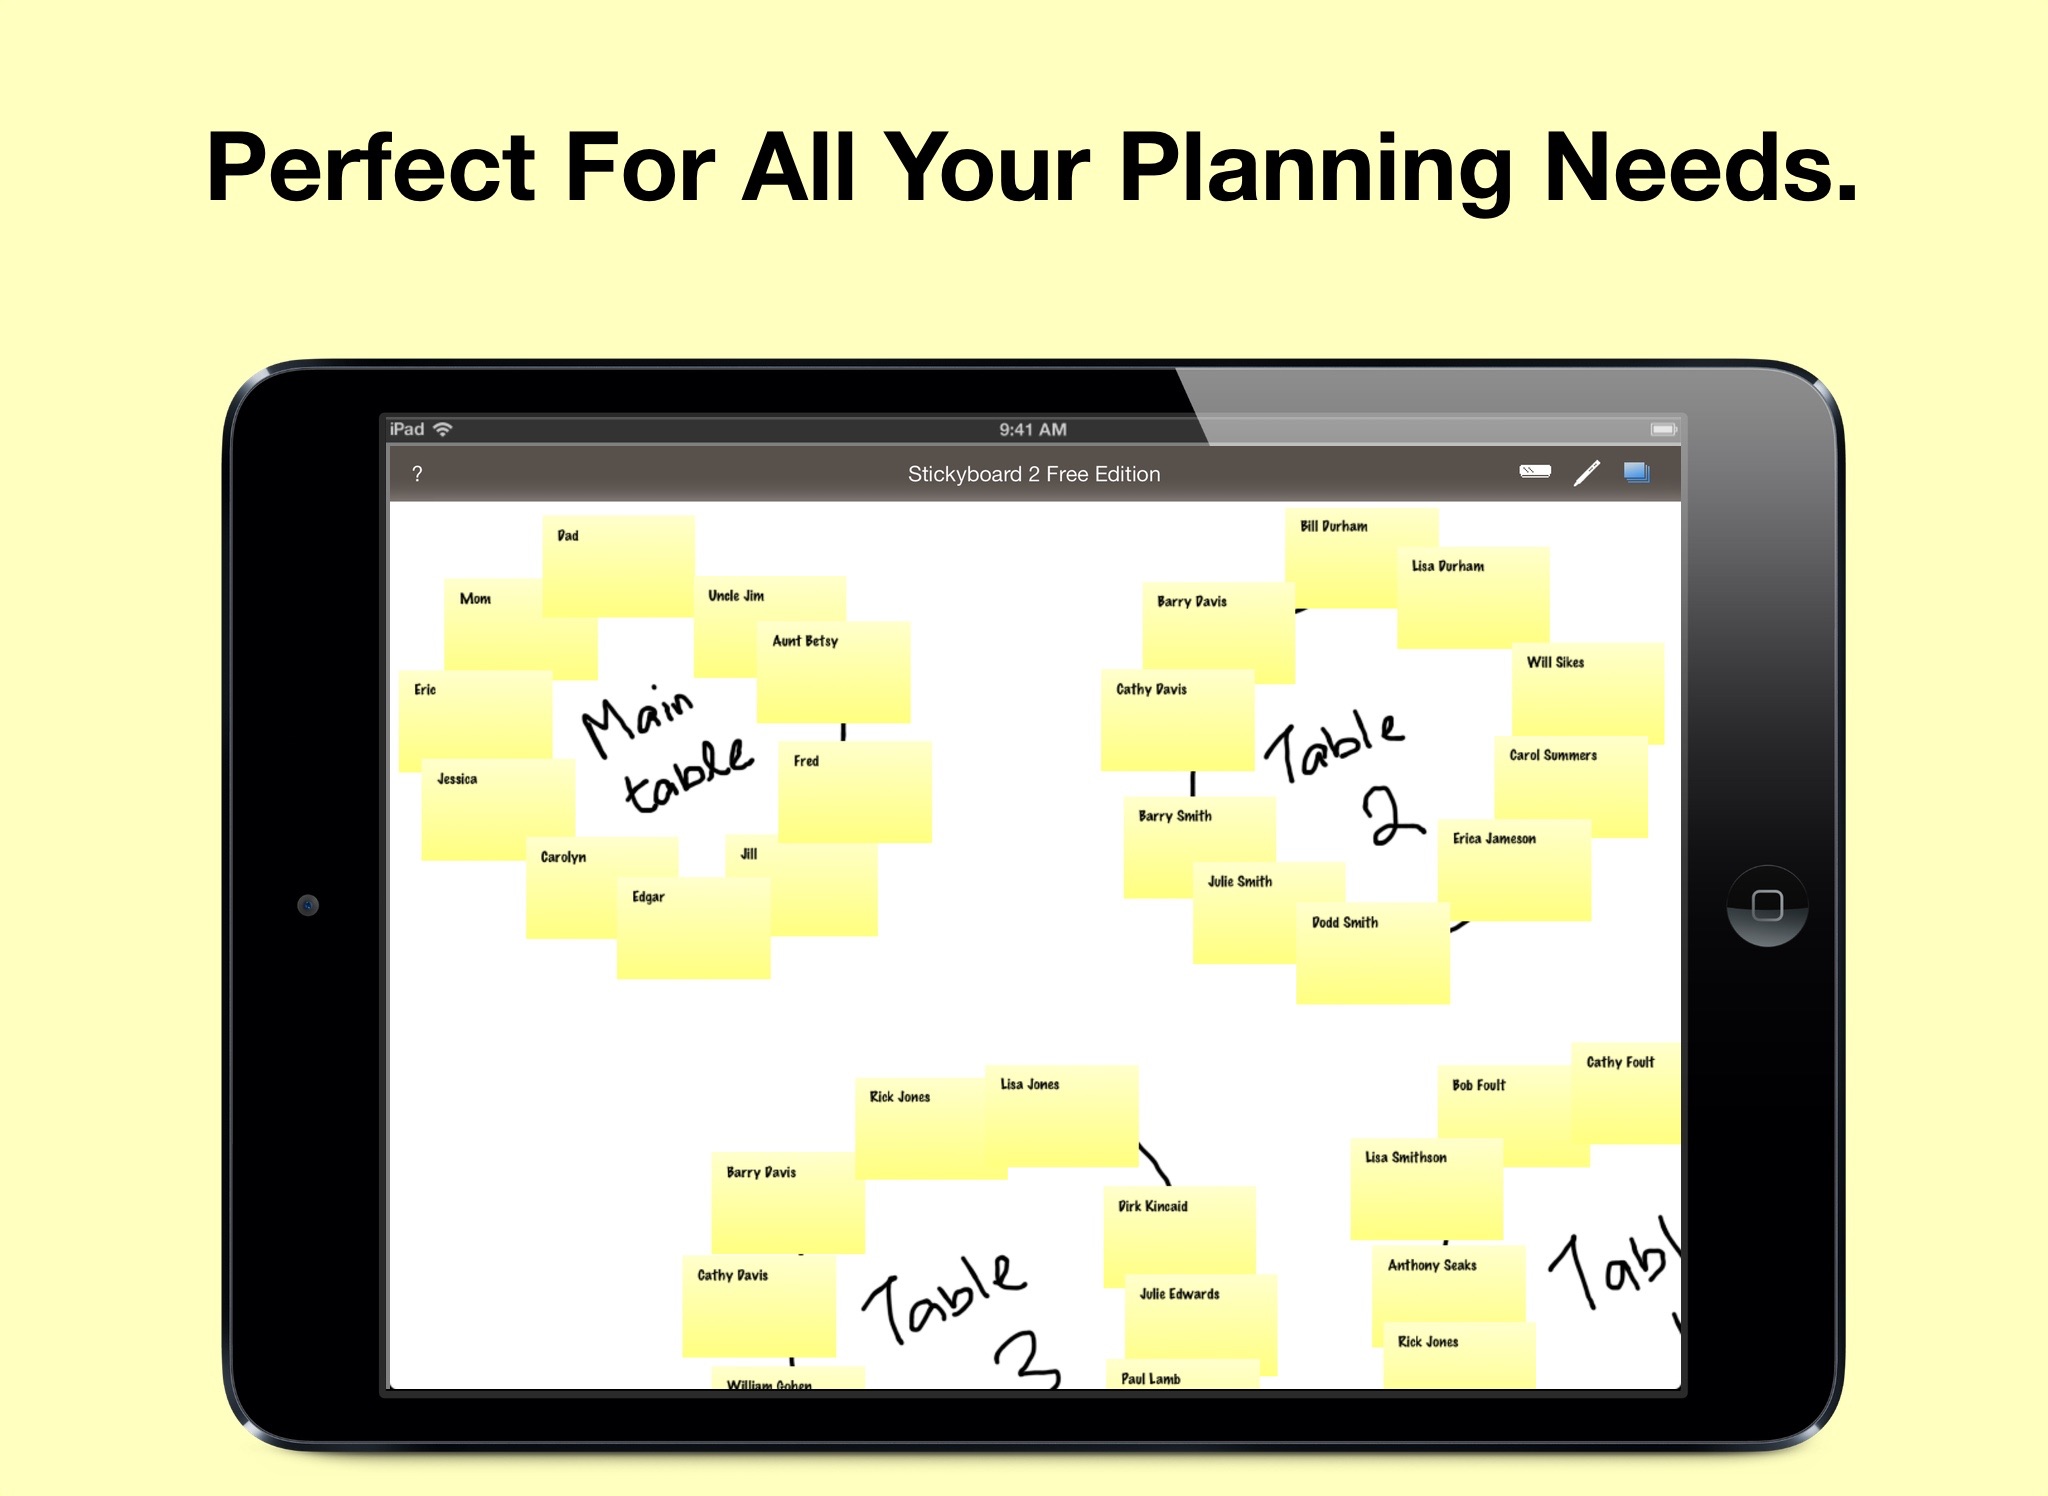 Stickyboard 2 Free Edition: Sticky Notes on a Whiteboard to Brainstorm, Mindmap, Plan, and Organize screenshot 4